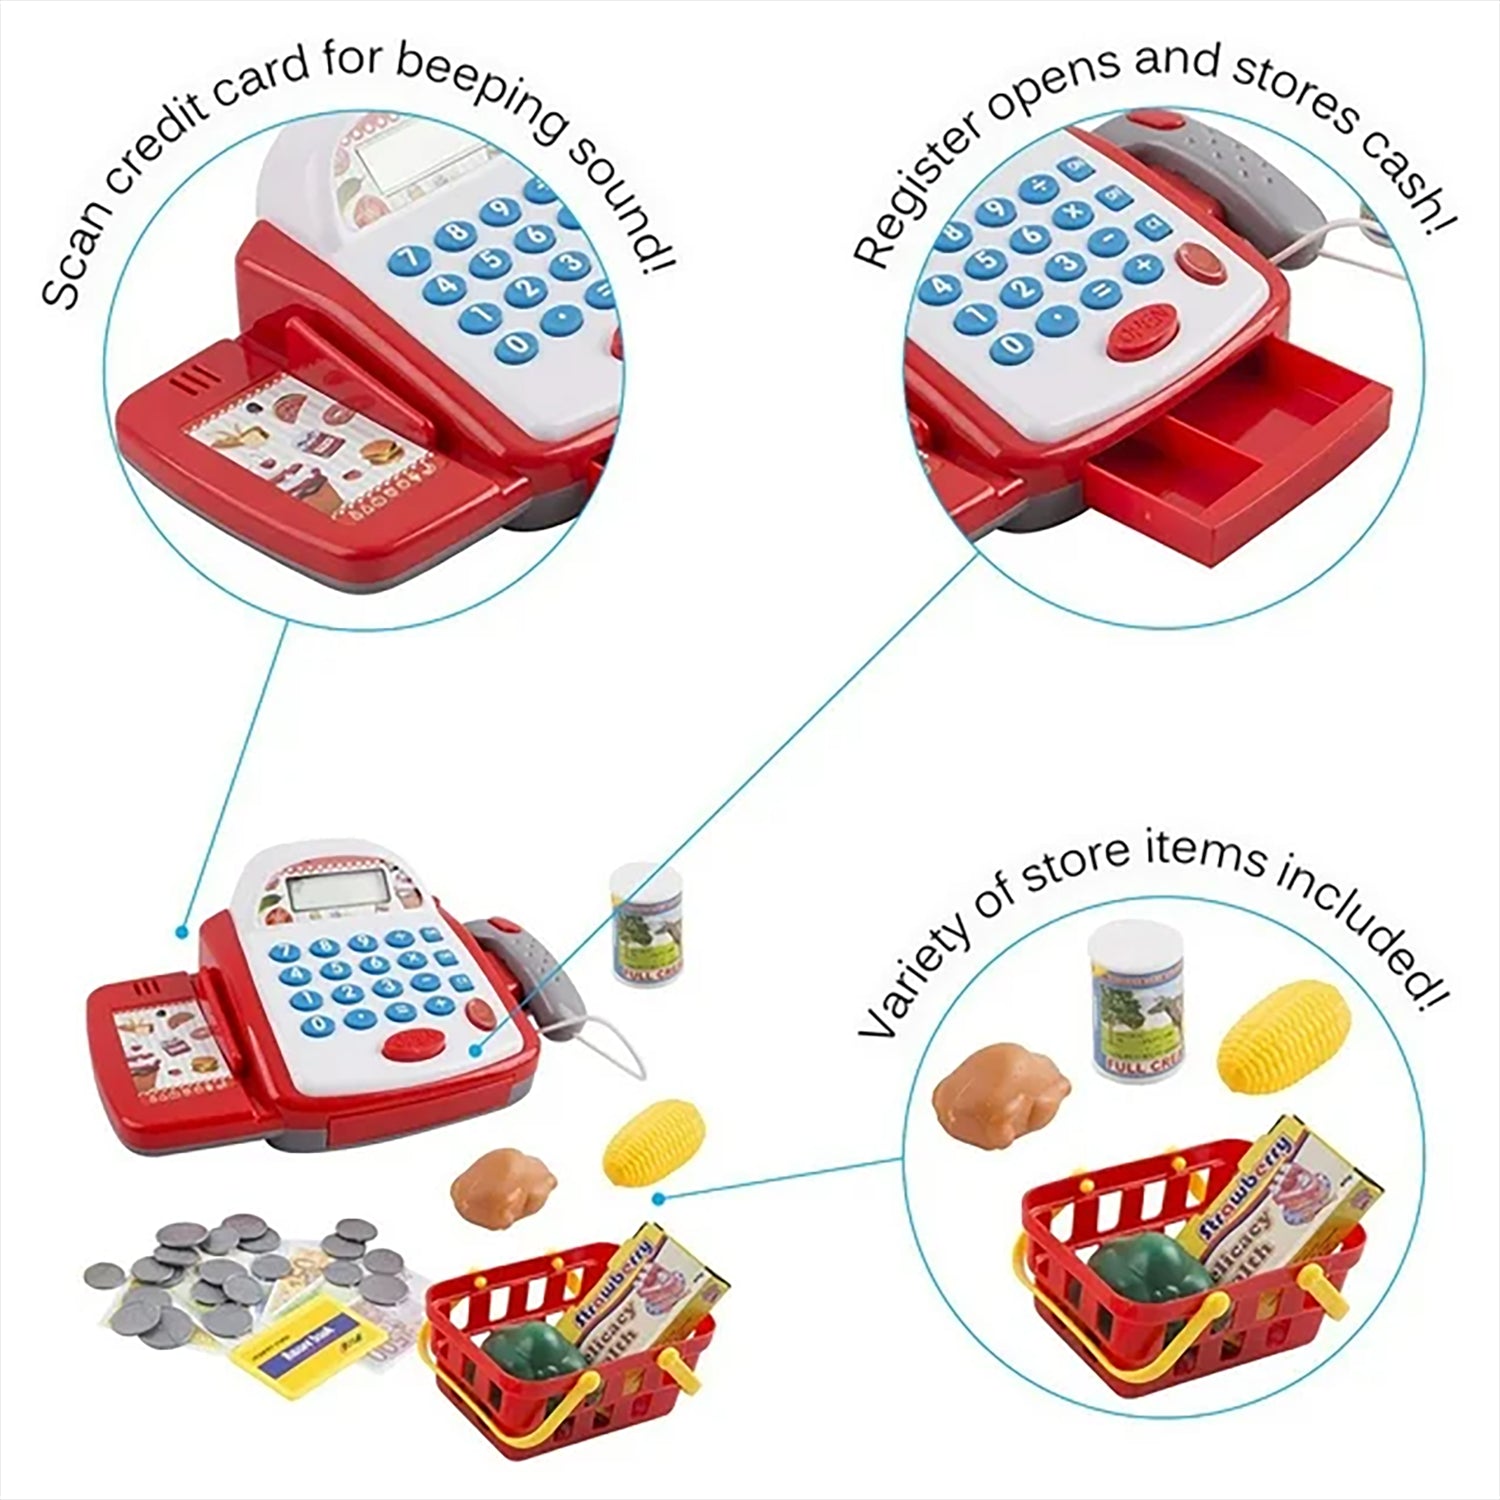 White & Red Cash Register Toy by The Magic Toy Shop - UKBuyZone